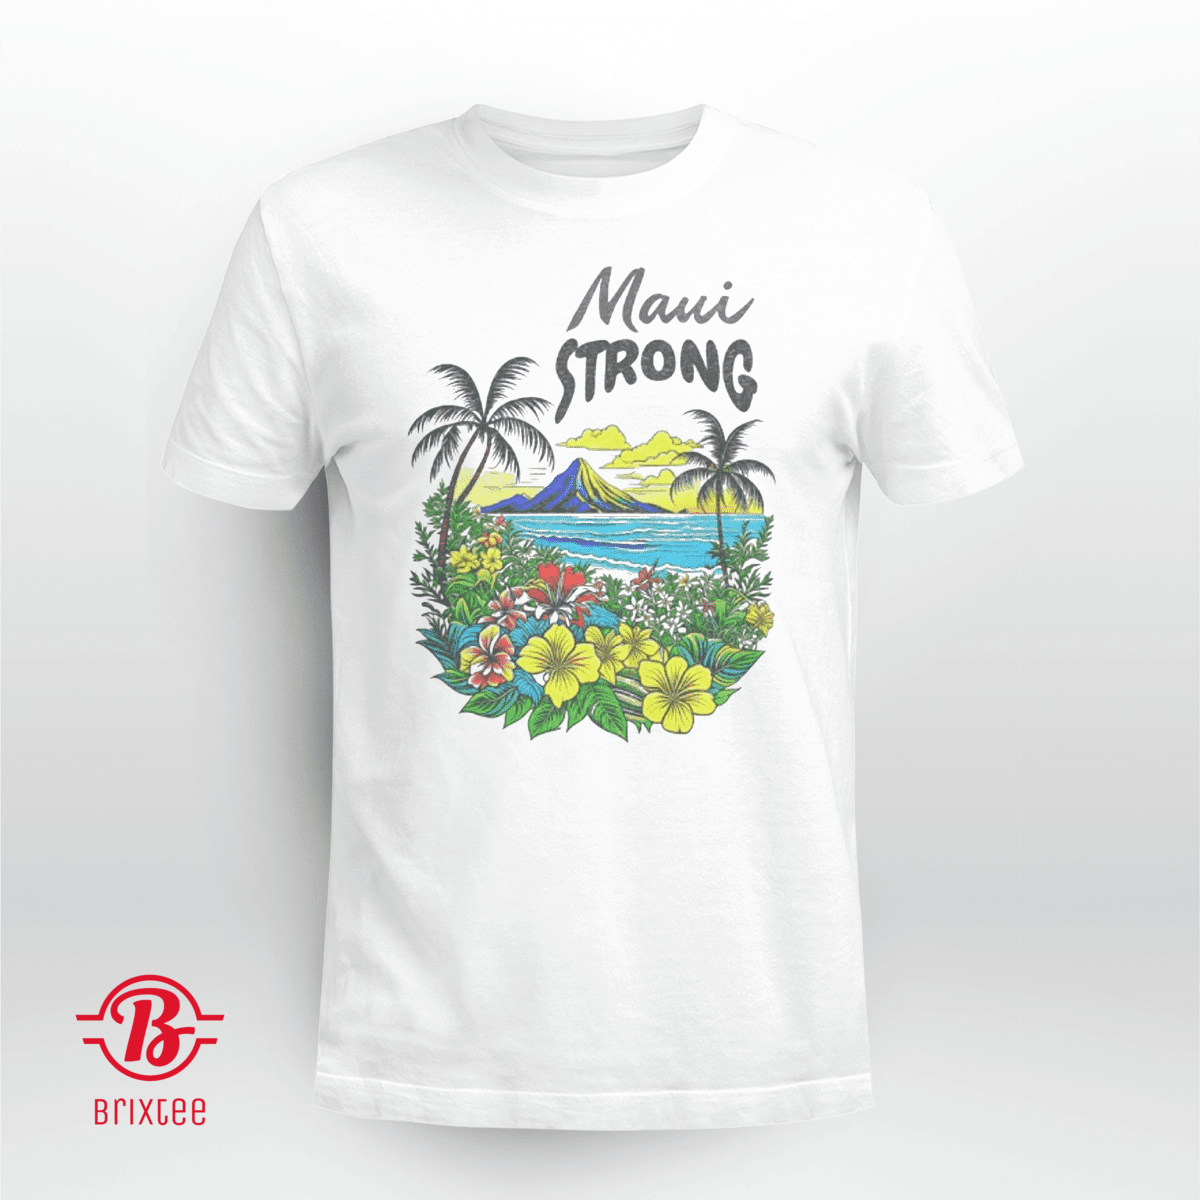 Maui Strong Shirt Fundraiser Helping Wildfires On Maui